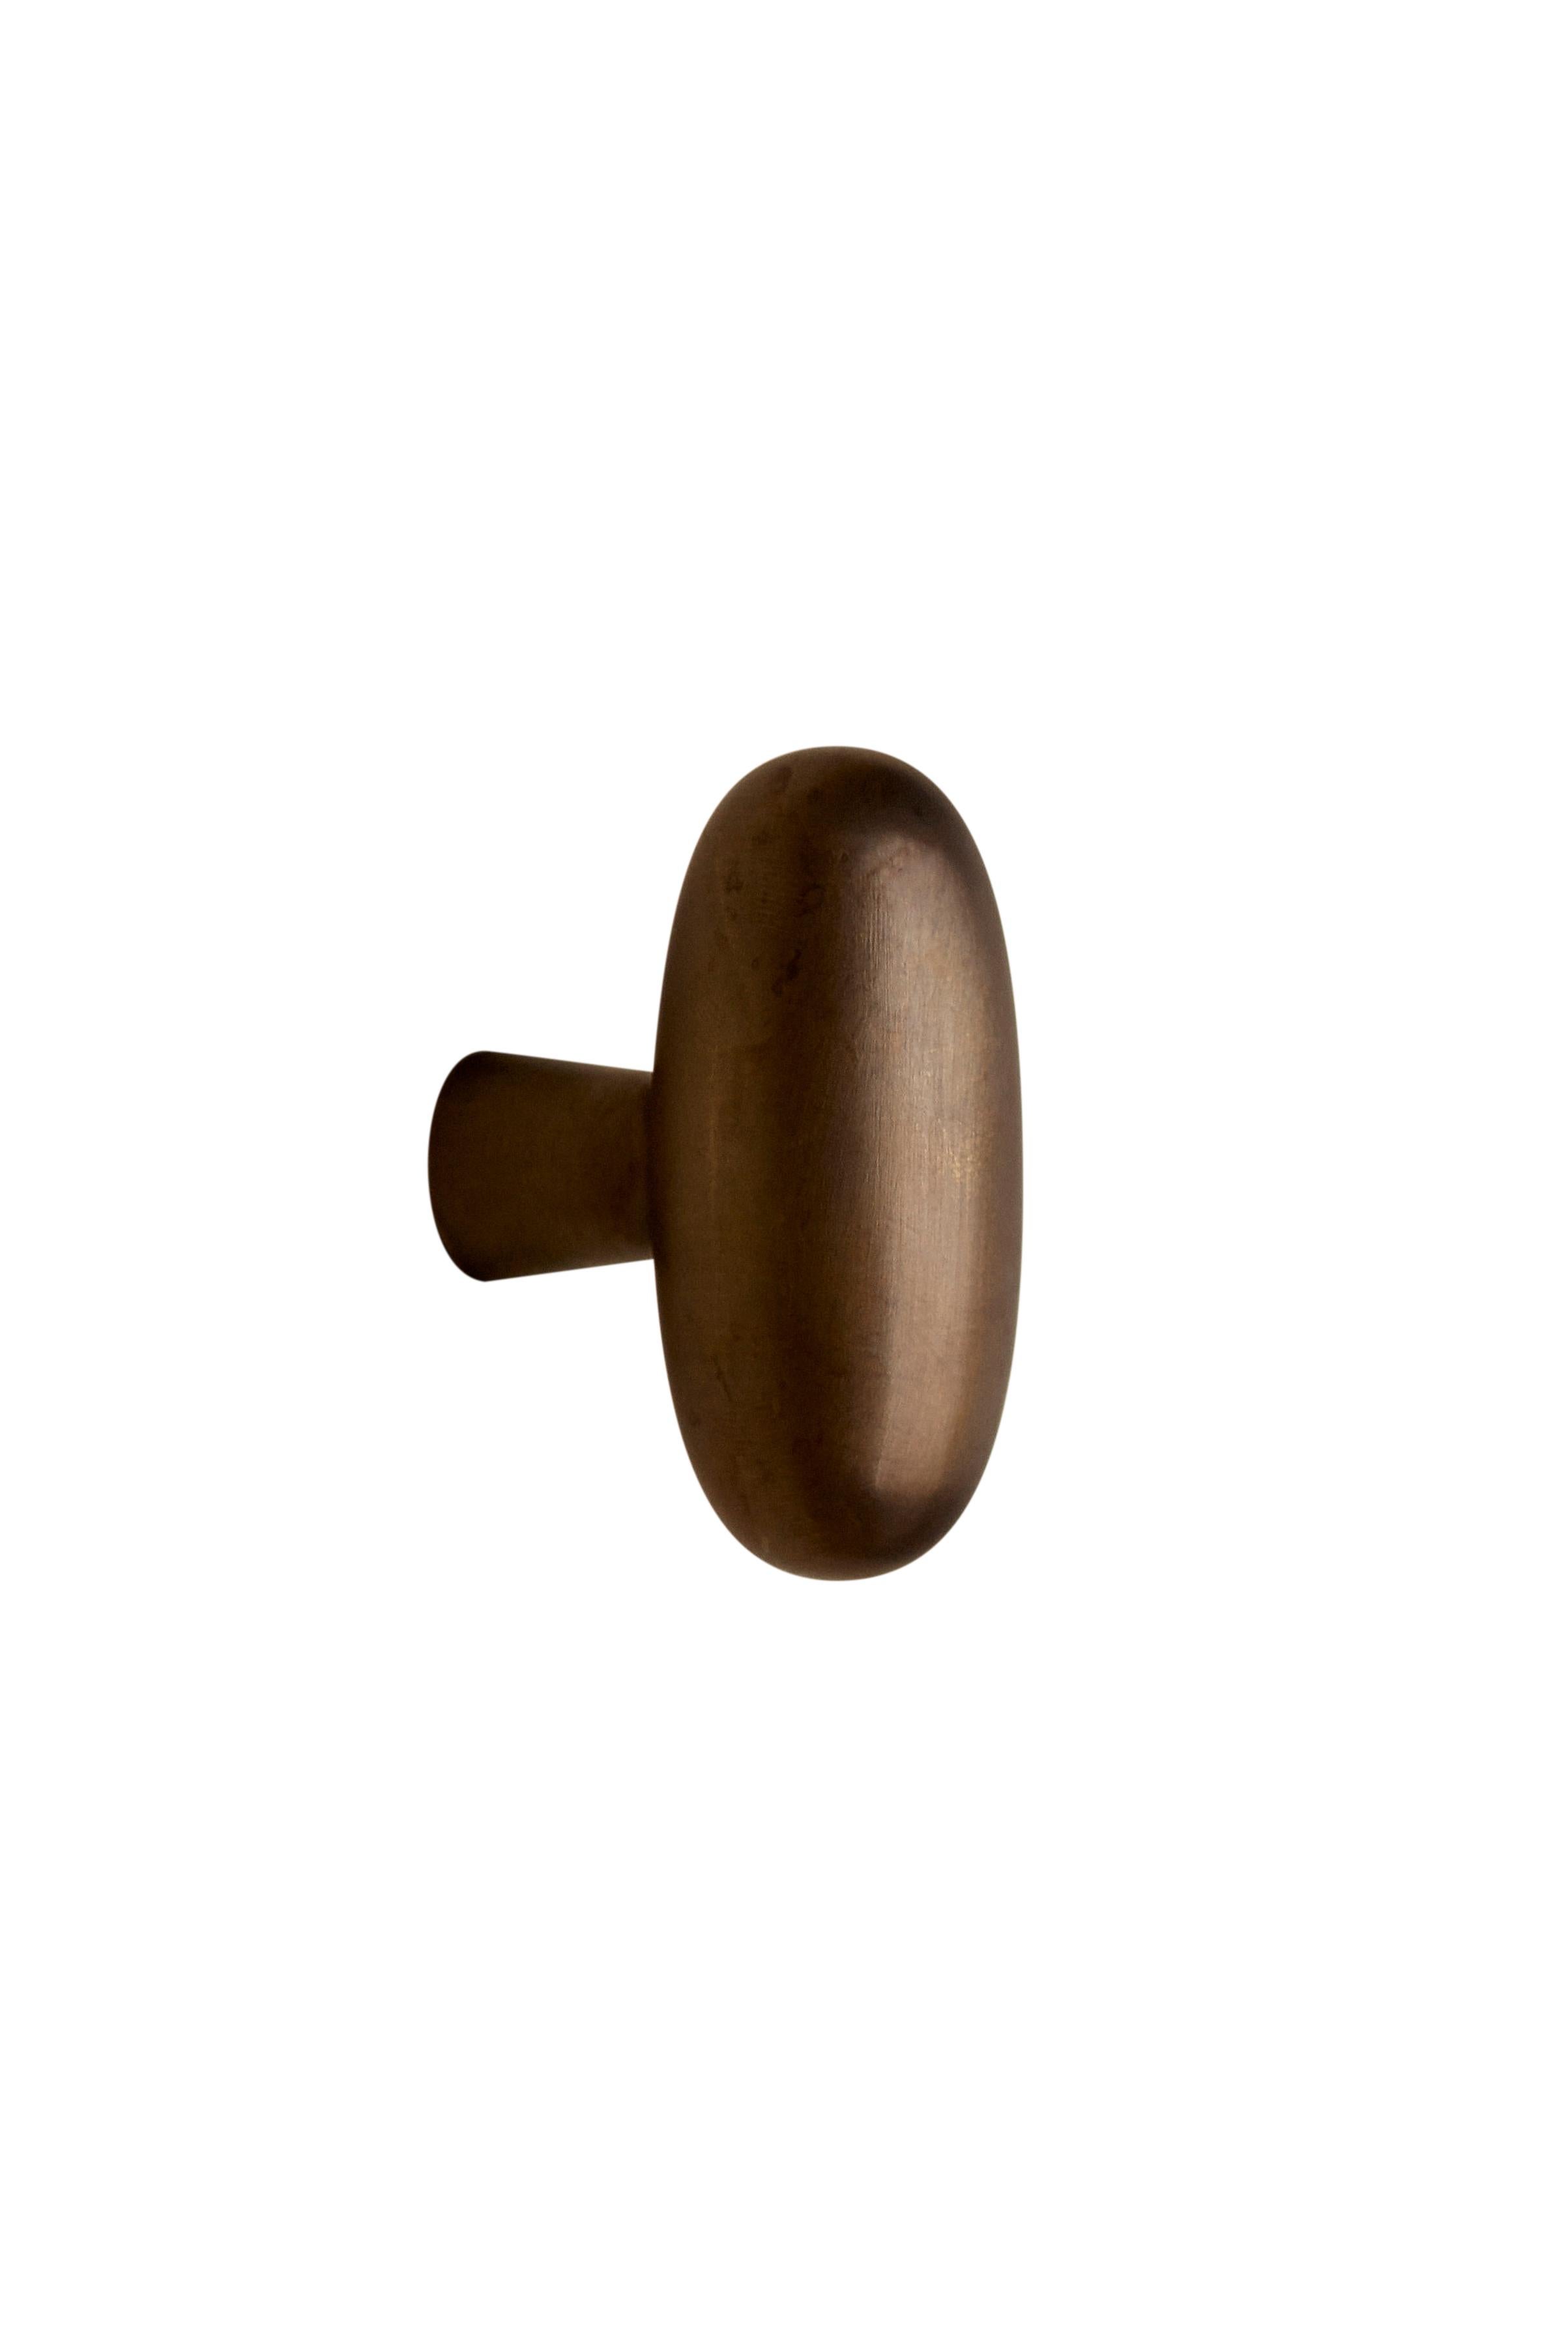 Contemporary Door Handle / Knob 'Blunt' by Spaces Within, Amber Brass In New Condition For Sale In Paris, FR